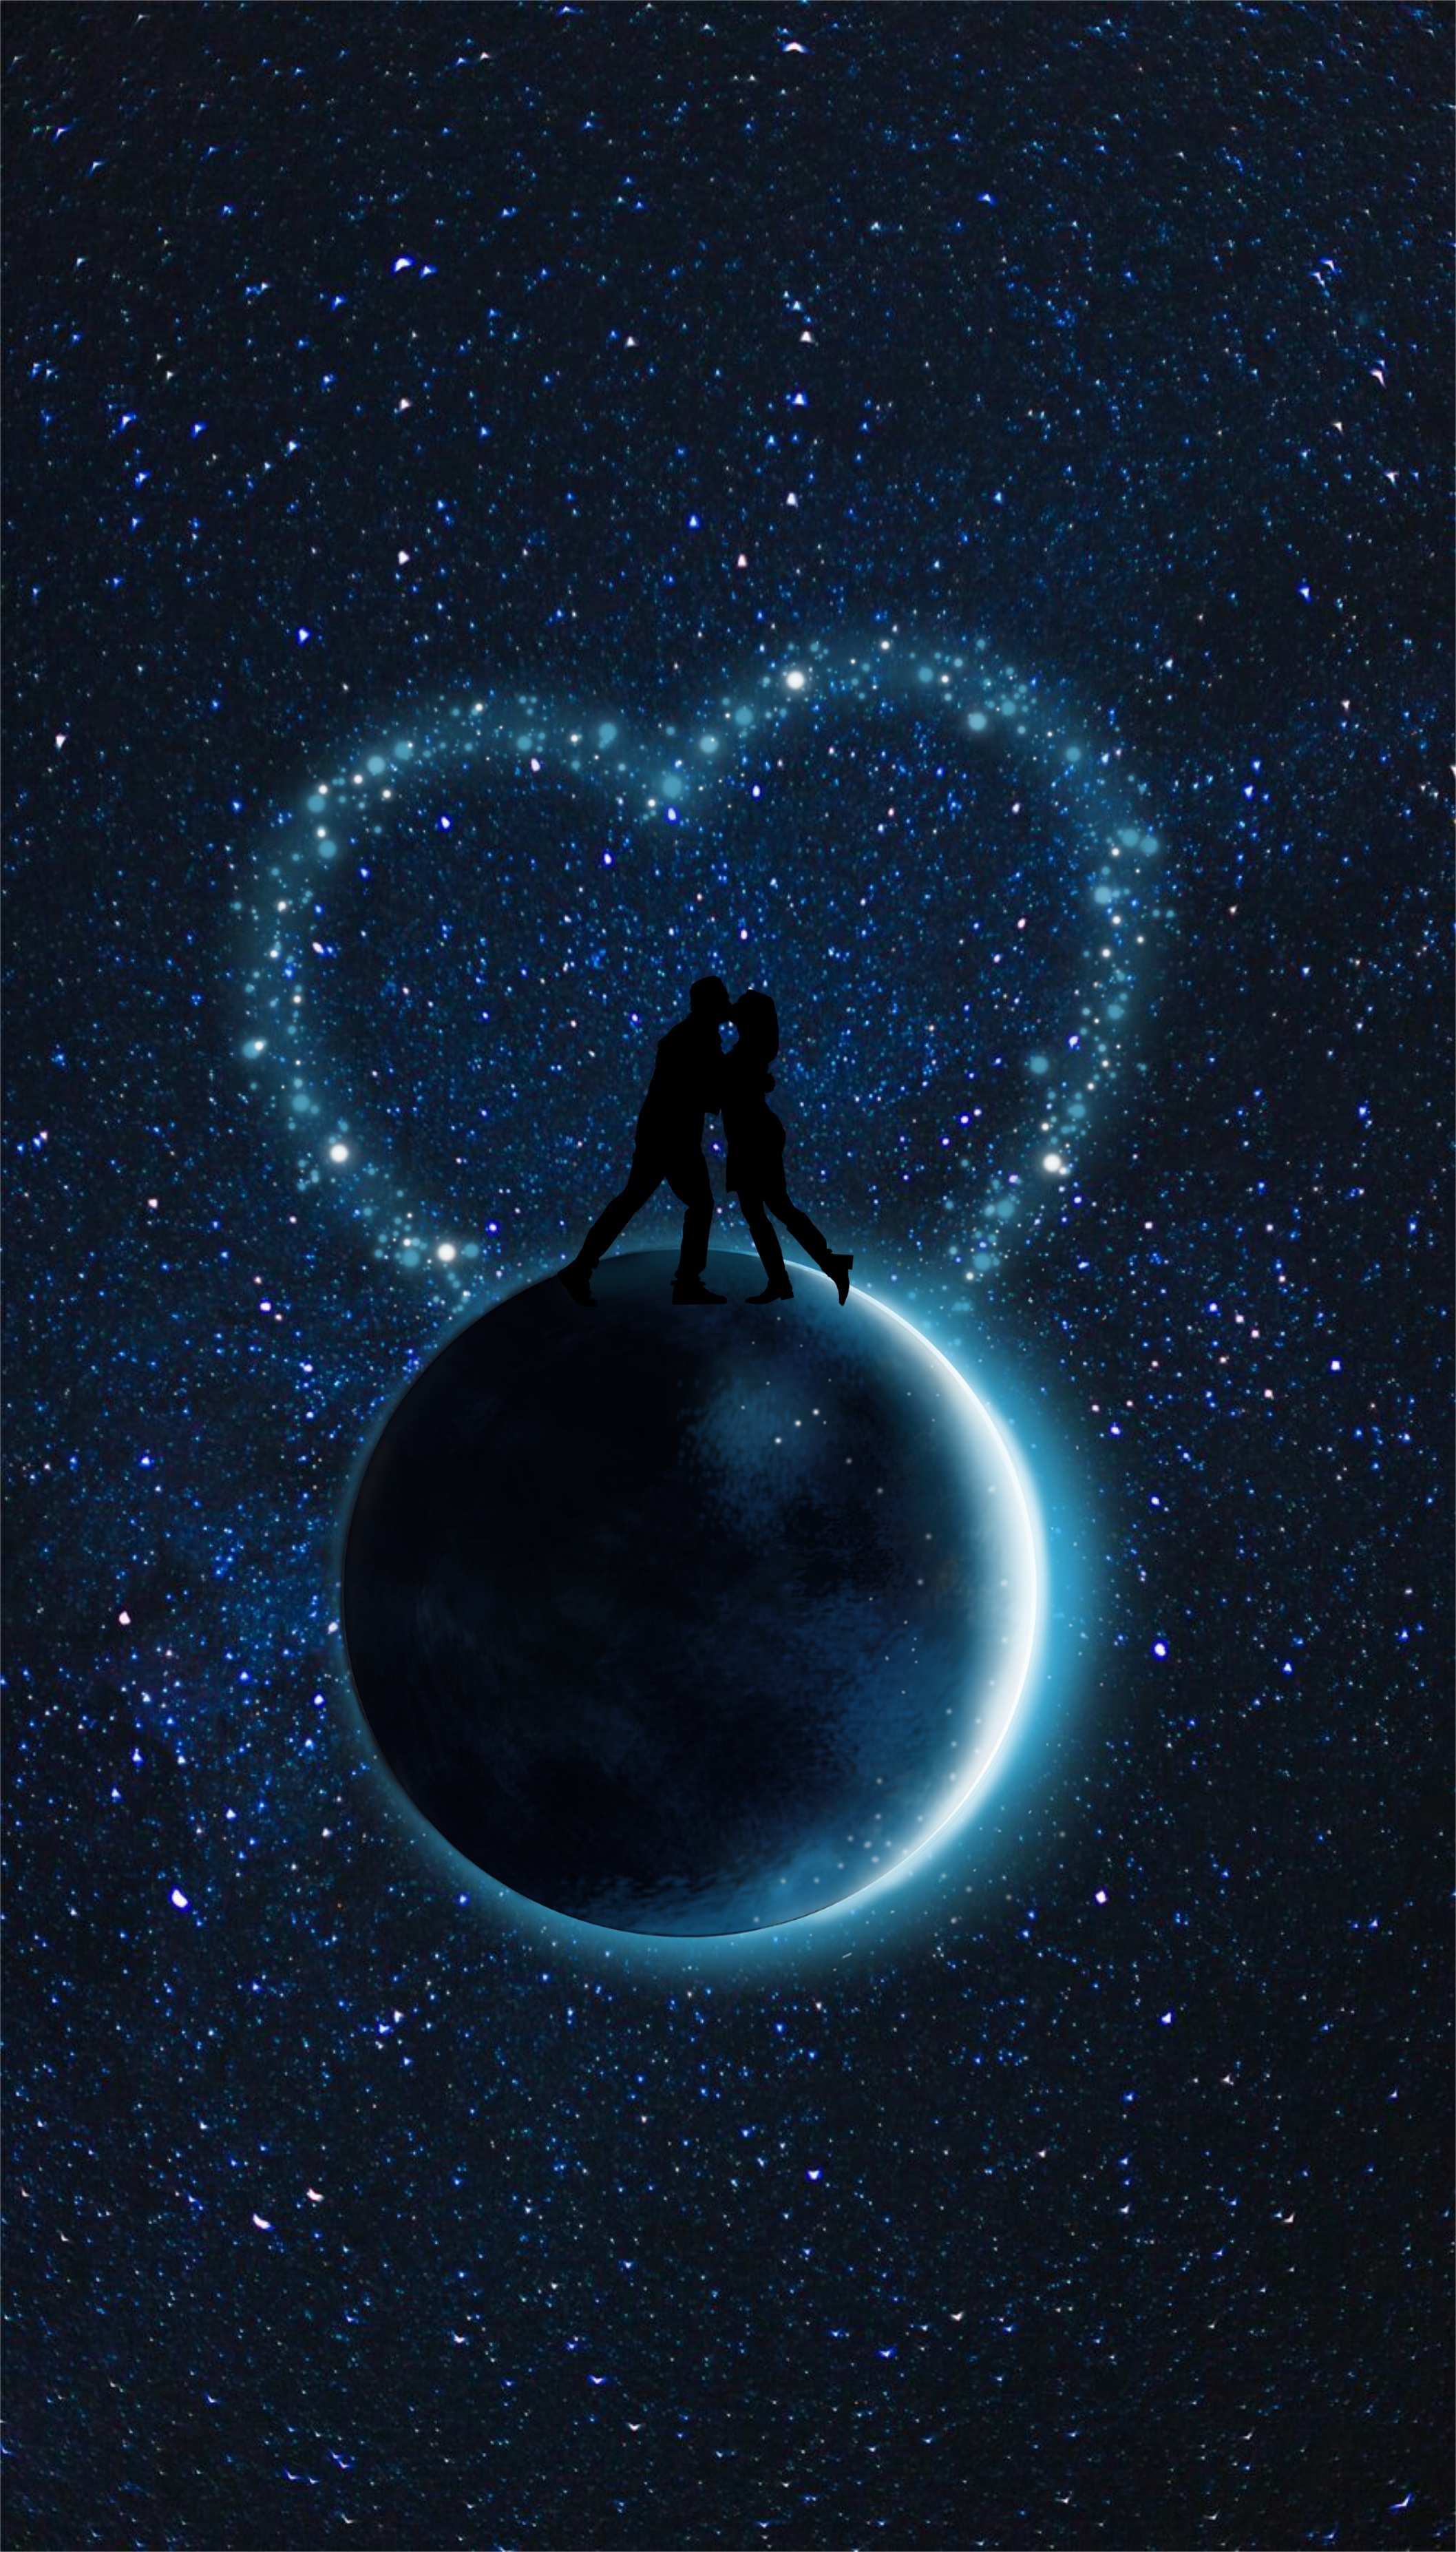 73299 download wallpaper vector, love, couple, pair, silhouettes, starry sky, planet screensavers and pictures for free